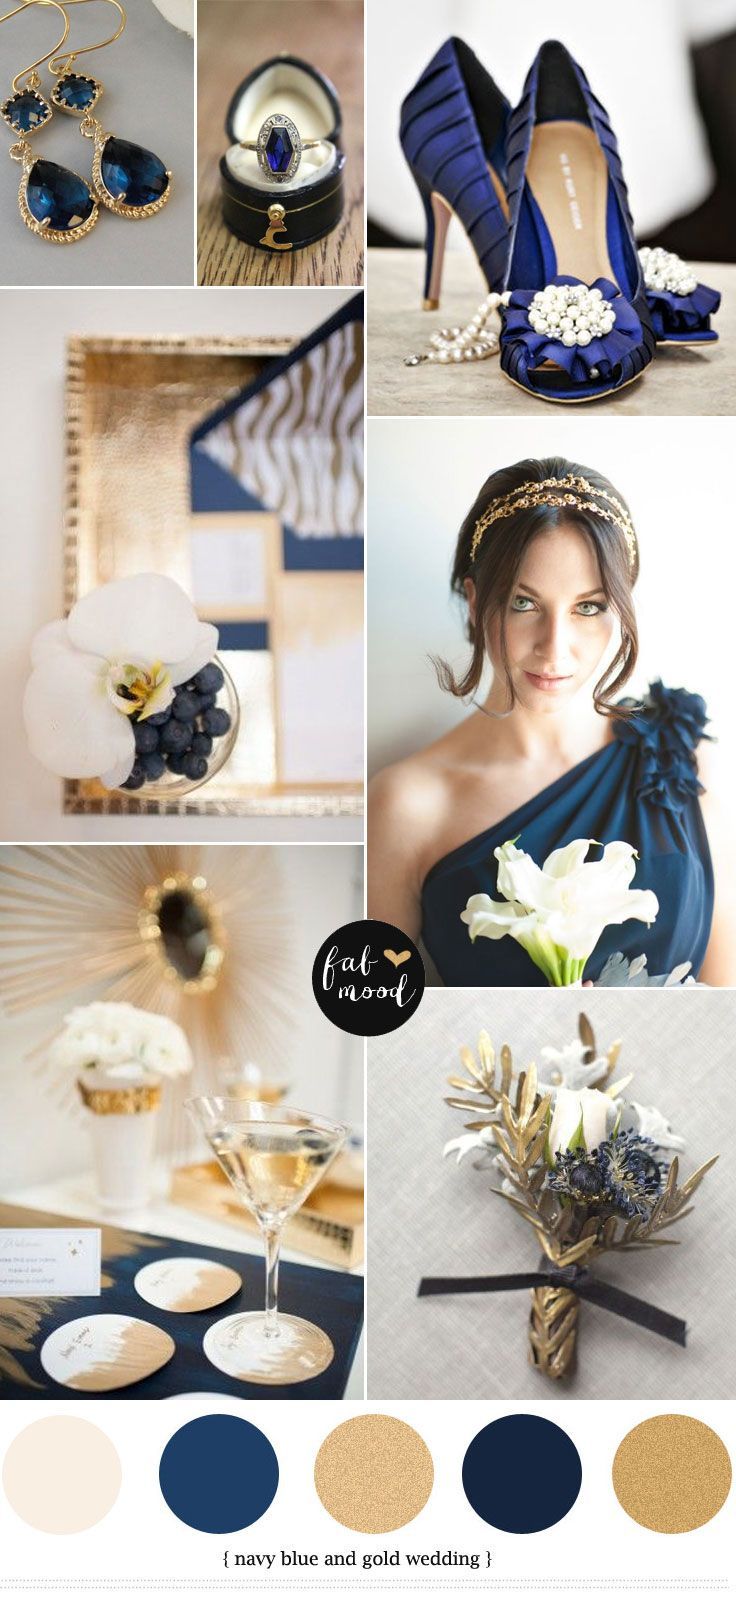 gold and navy blue wedding colours palette,navy blue and gold wedding colors,wedding colours,wedding mood board,wedding